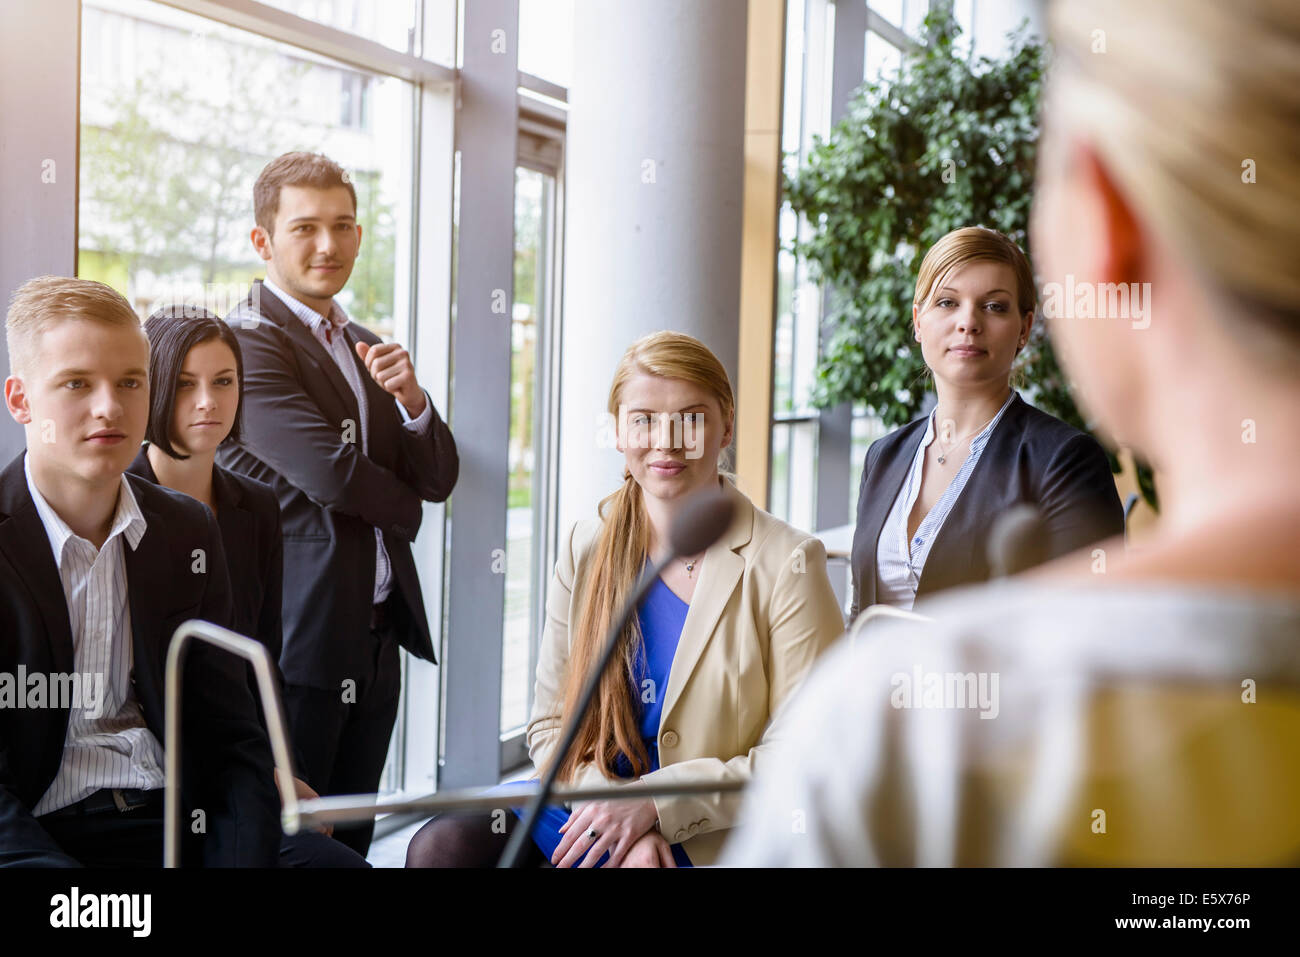 Businesswomen and men listening to speaker in office conference room Stock Photo